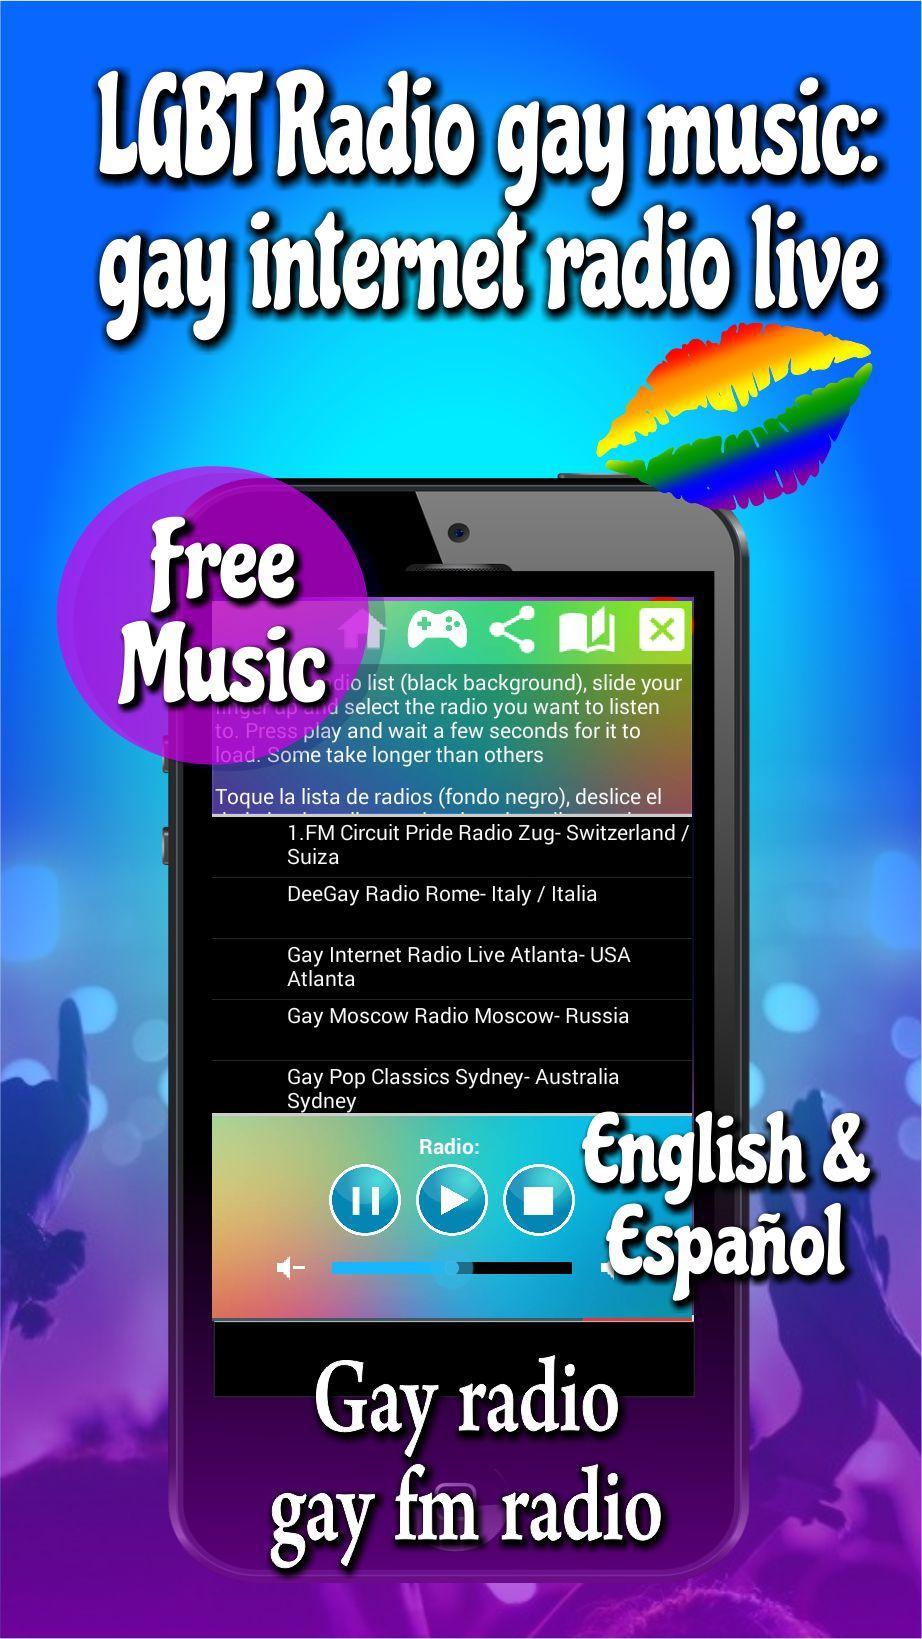 LGBT Radio gay music: gay internet radio live for Android - APK Download